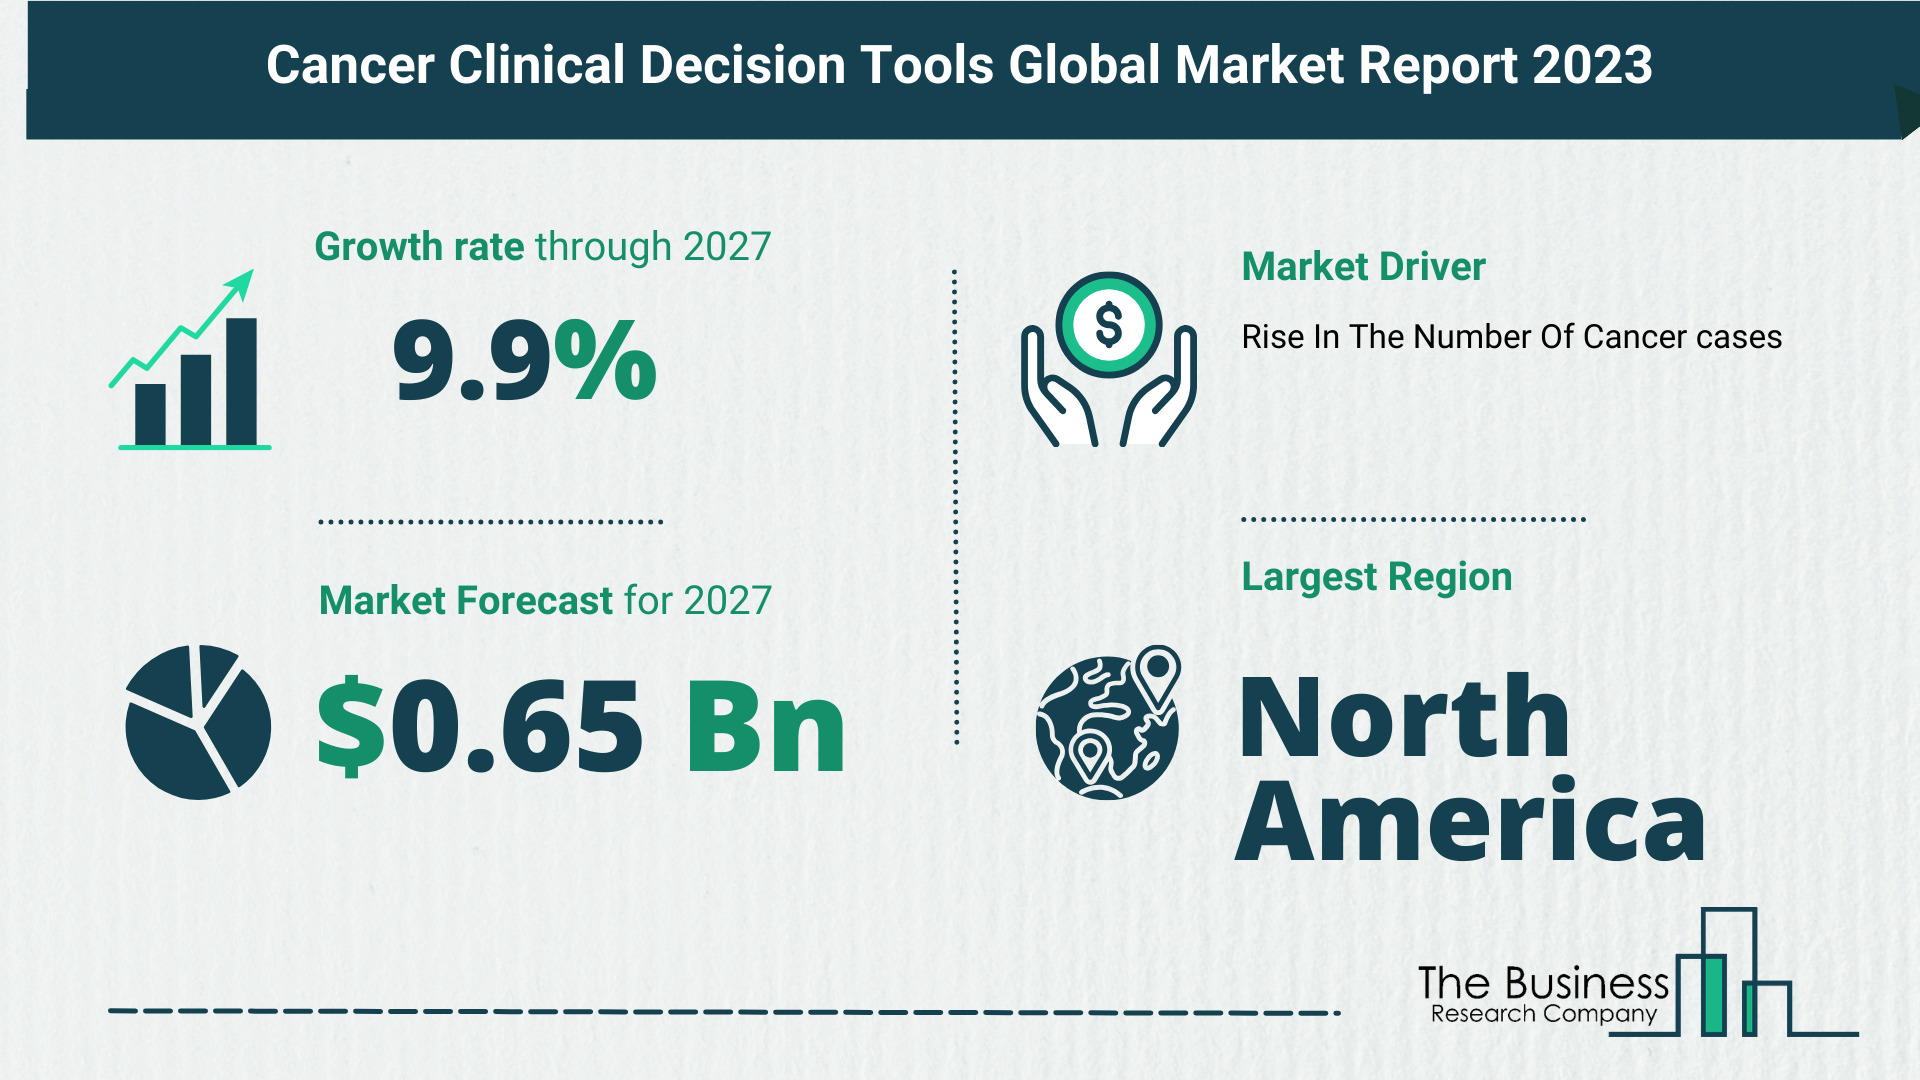 Cancer Clinical Decision Tools Market Report 2023: Market Size, Drivers, And Trends